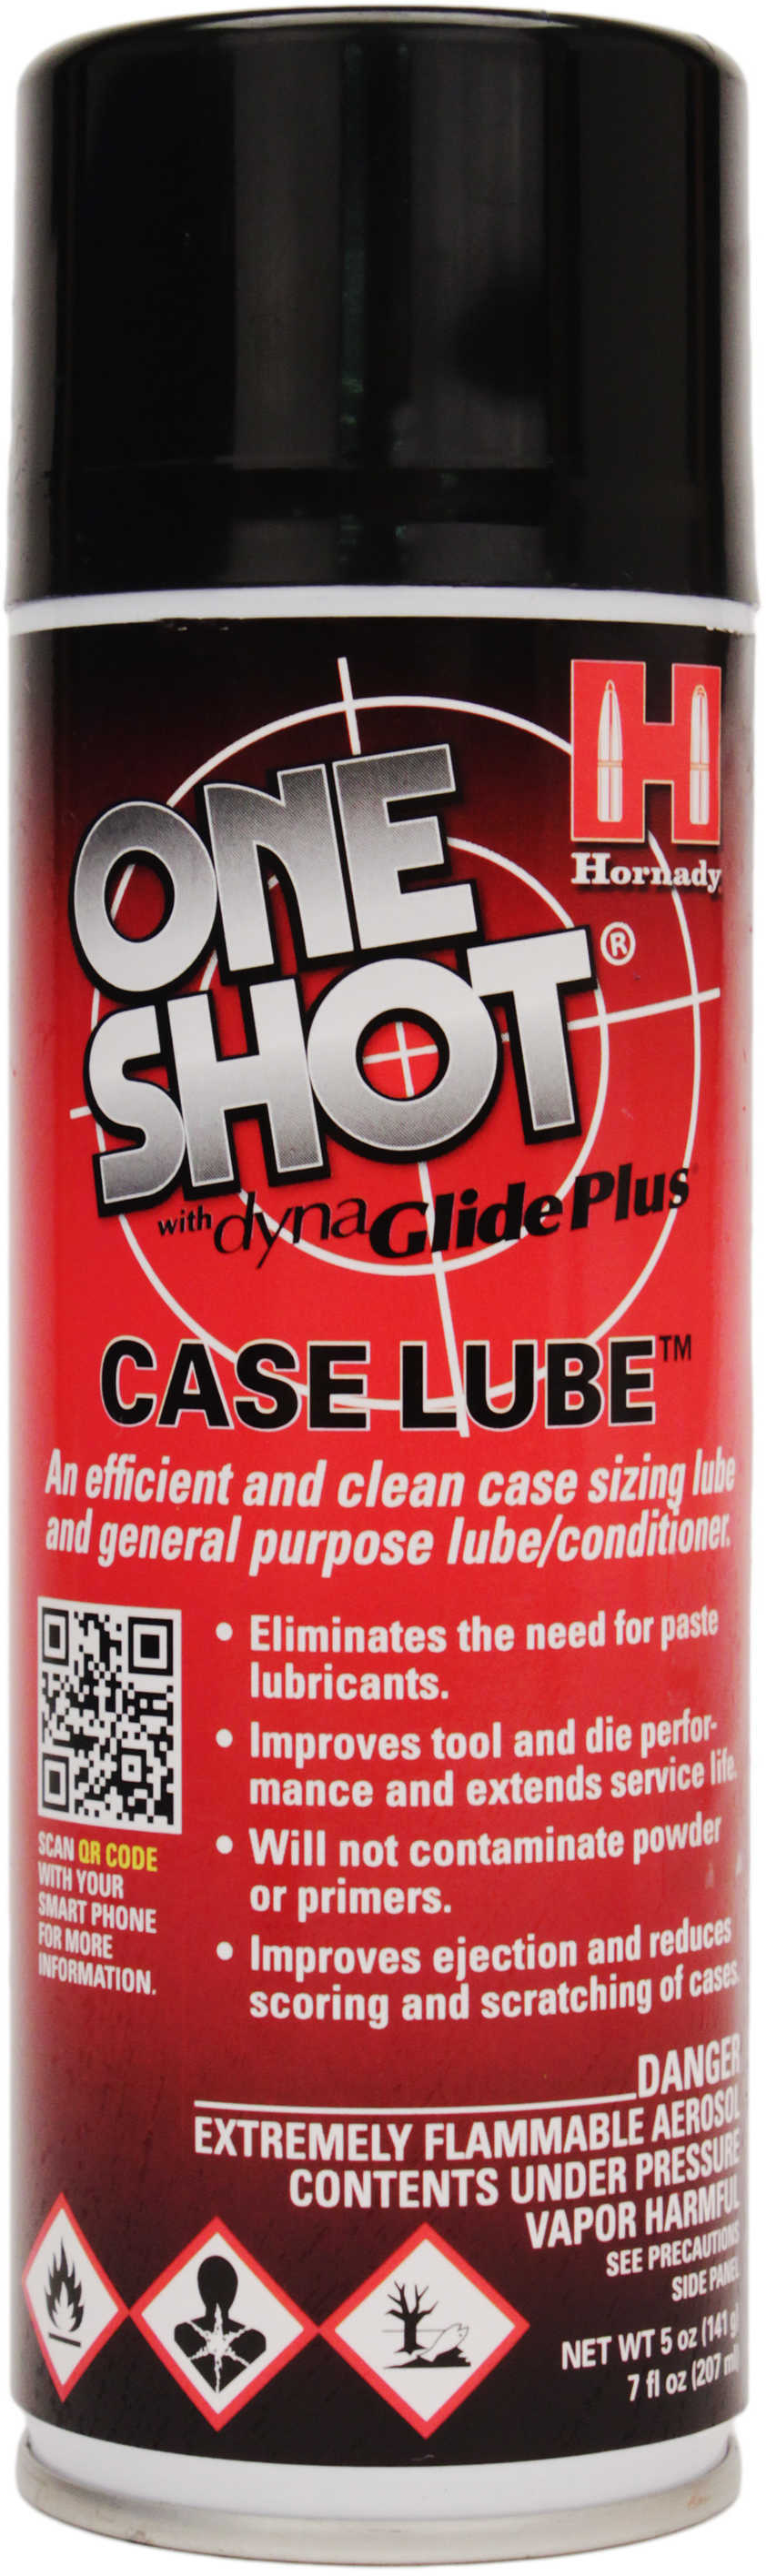 Hornady One Shot Case Lube Md: 9991